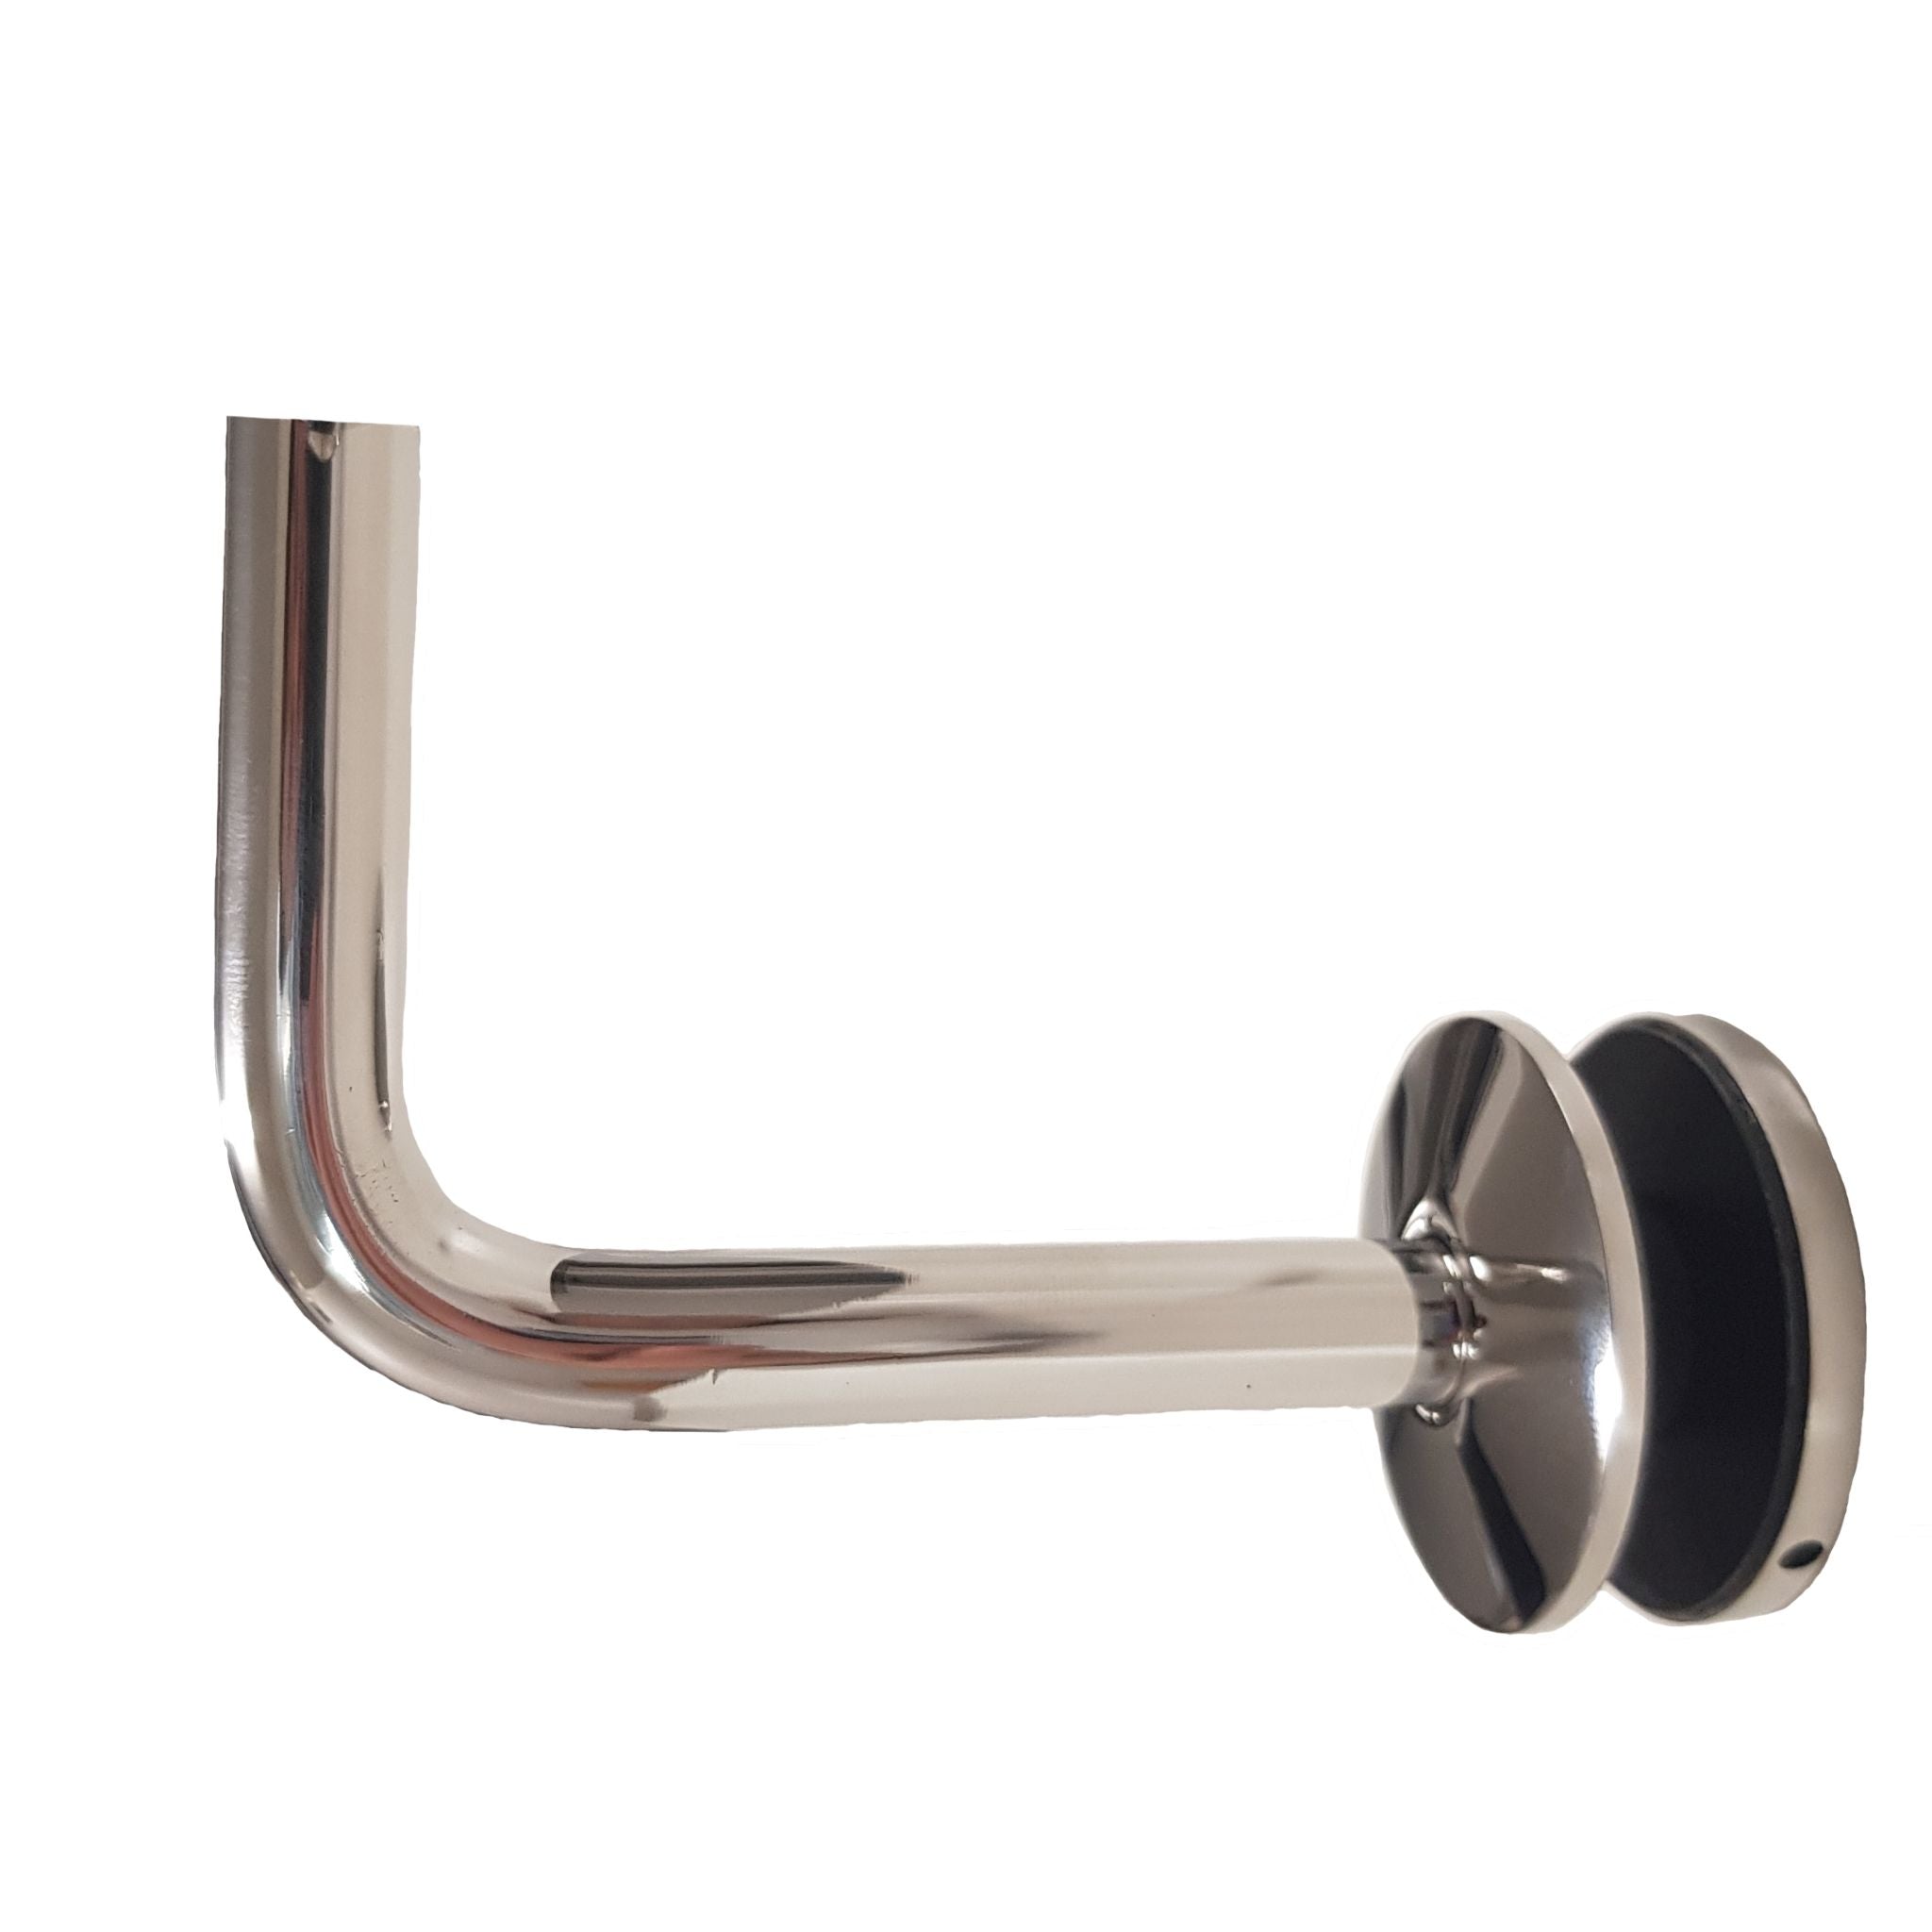 Handrail Bracket - Glassmount - Solid Bar - Stainless Steel Products